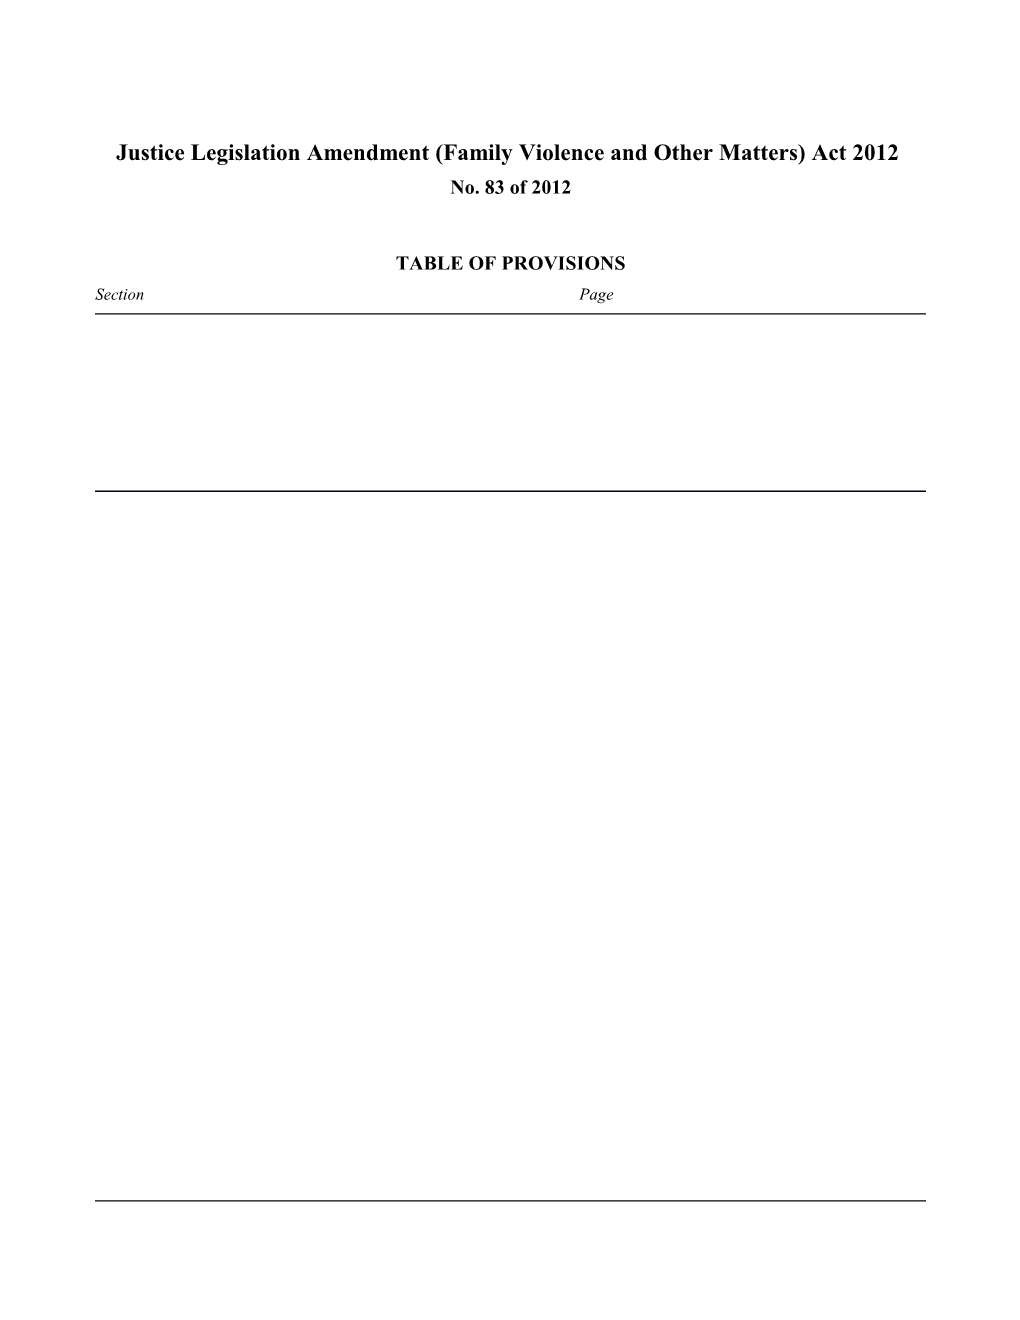 Justice Legislation Amendment (Family Violence and Other Matters) Act 2012